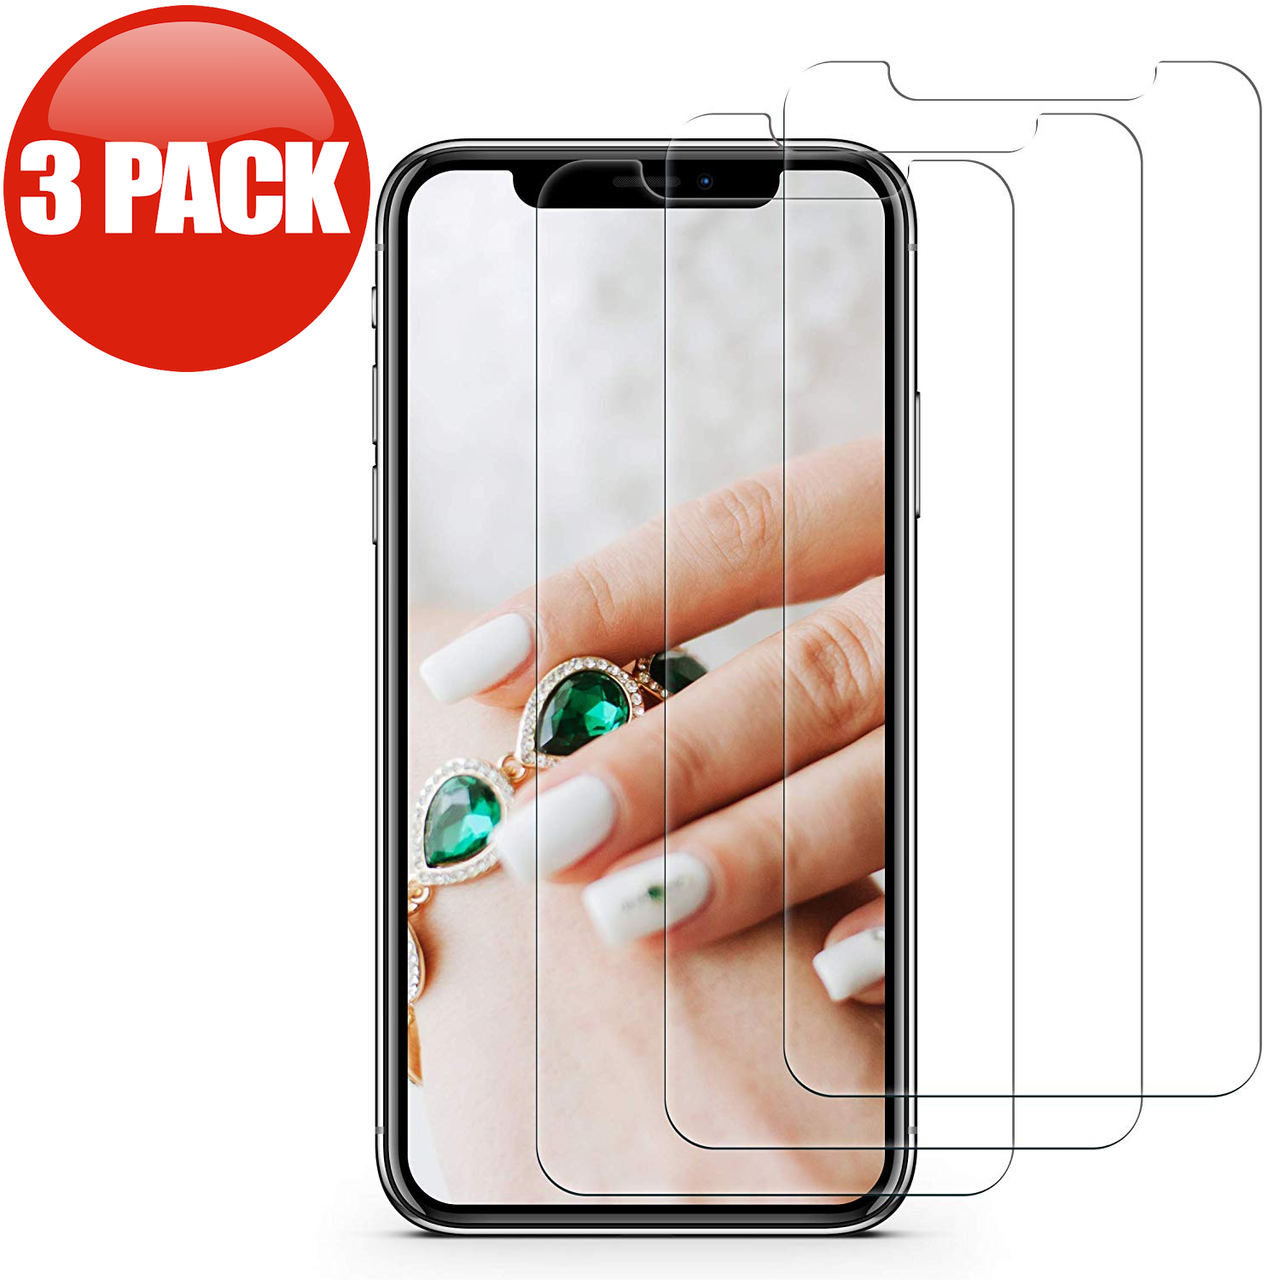 *SALE* HD Premium 2.5D Round Edge Tempered Glass Screen Protector for iPhone 11 Pro Max / iPhone ...